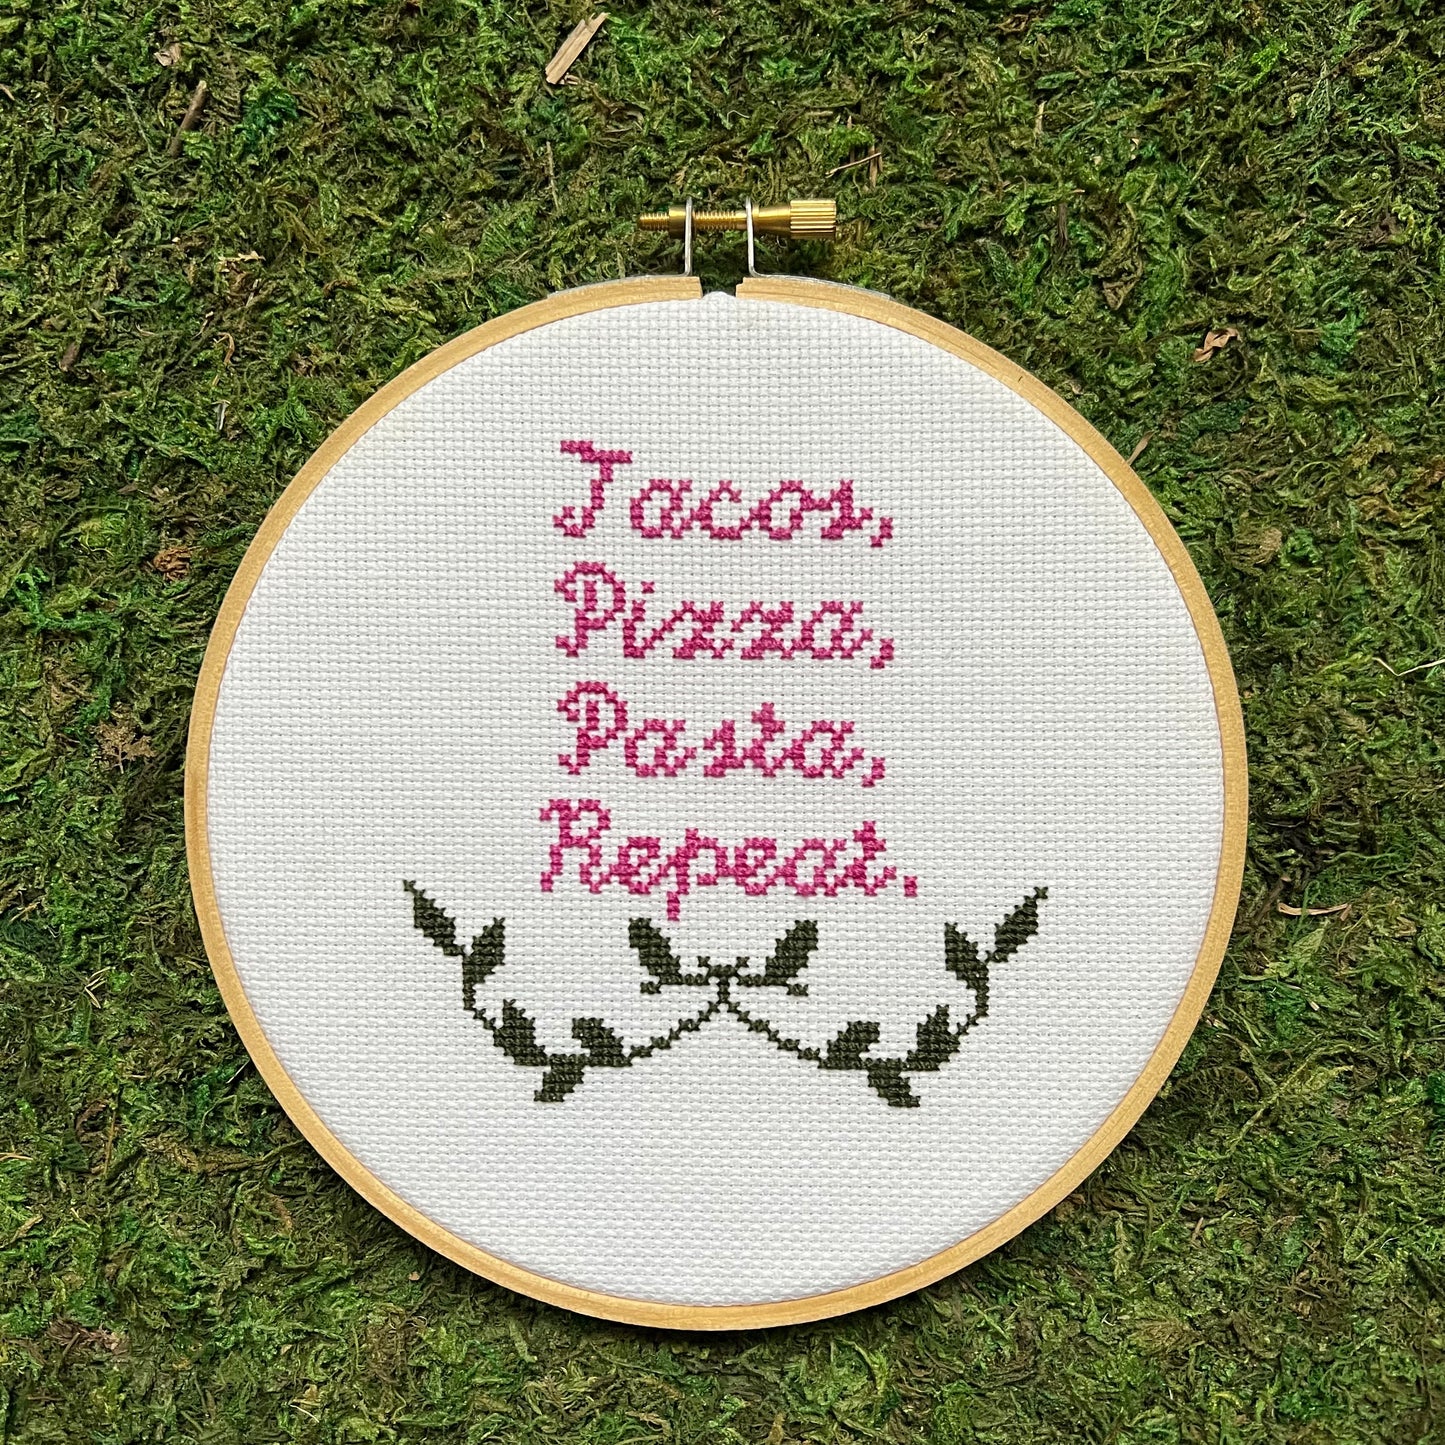 Tacos Pizza Pasta Repeat 6” Hand Stitched Cross Stitch Hoop